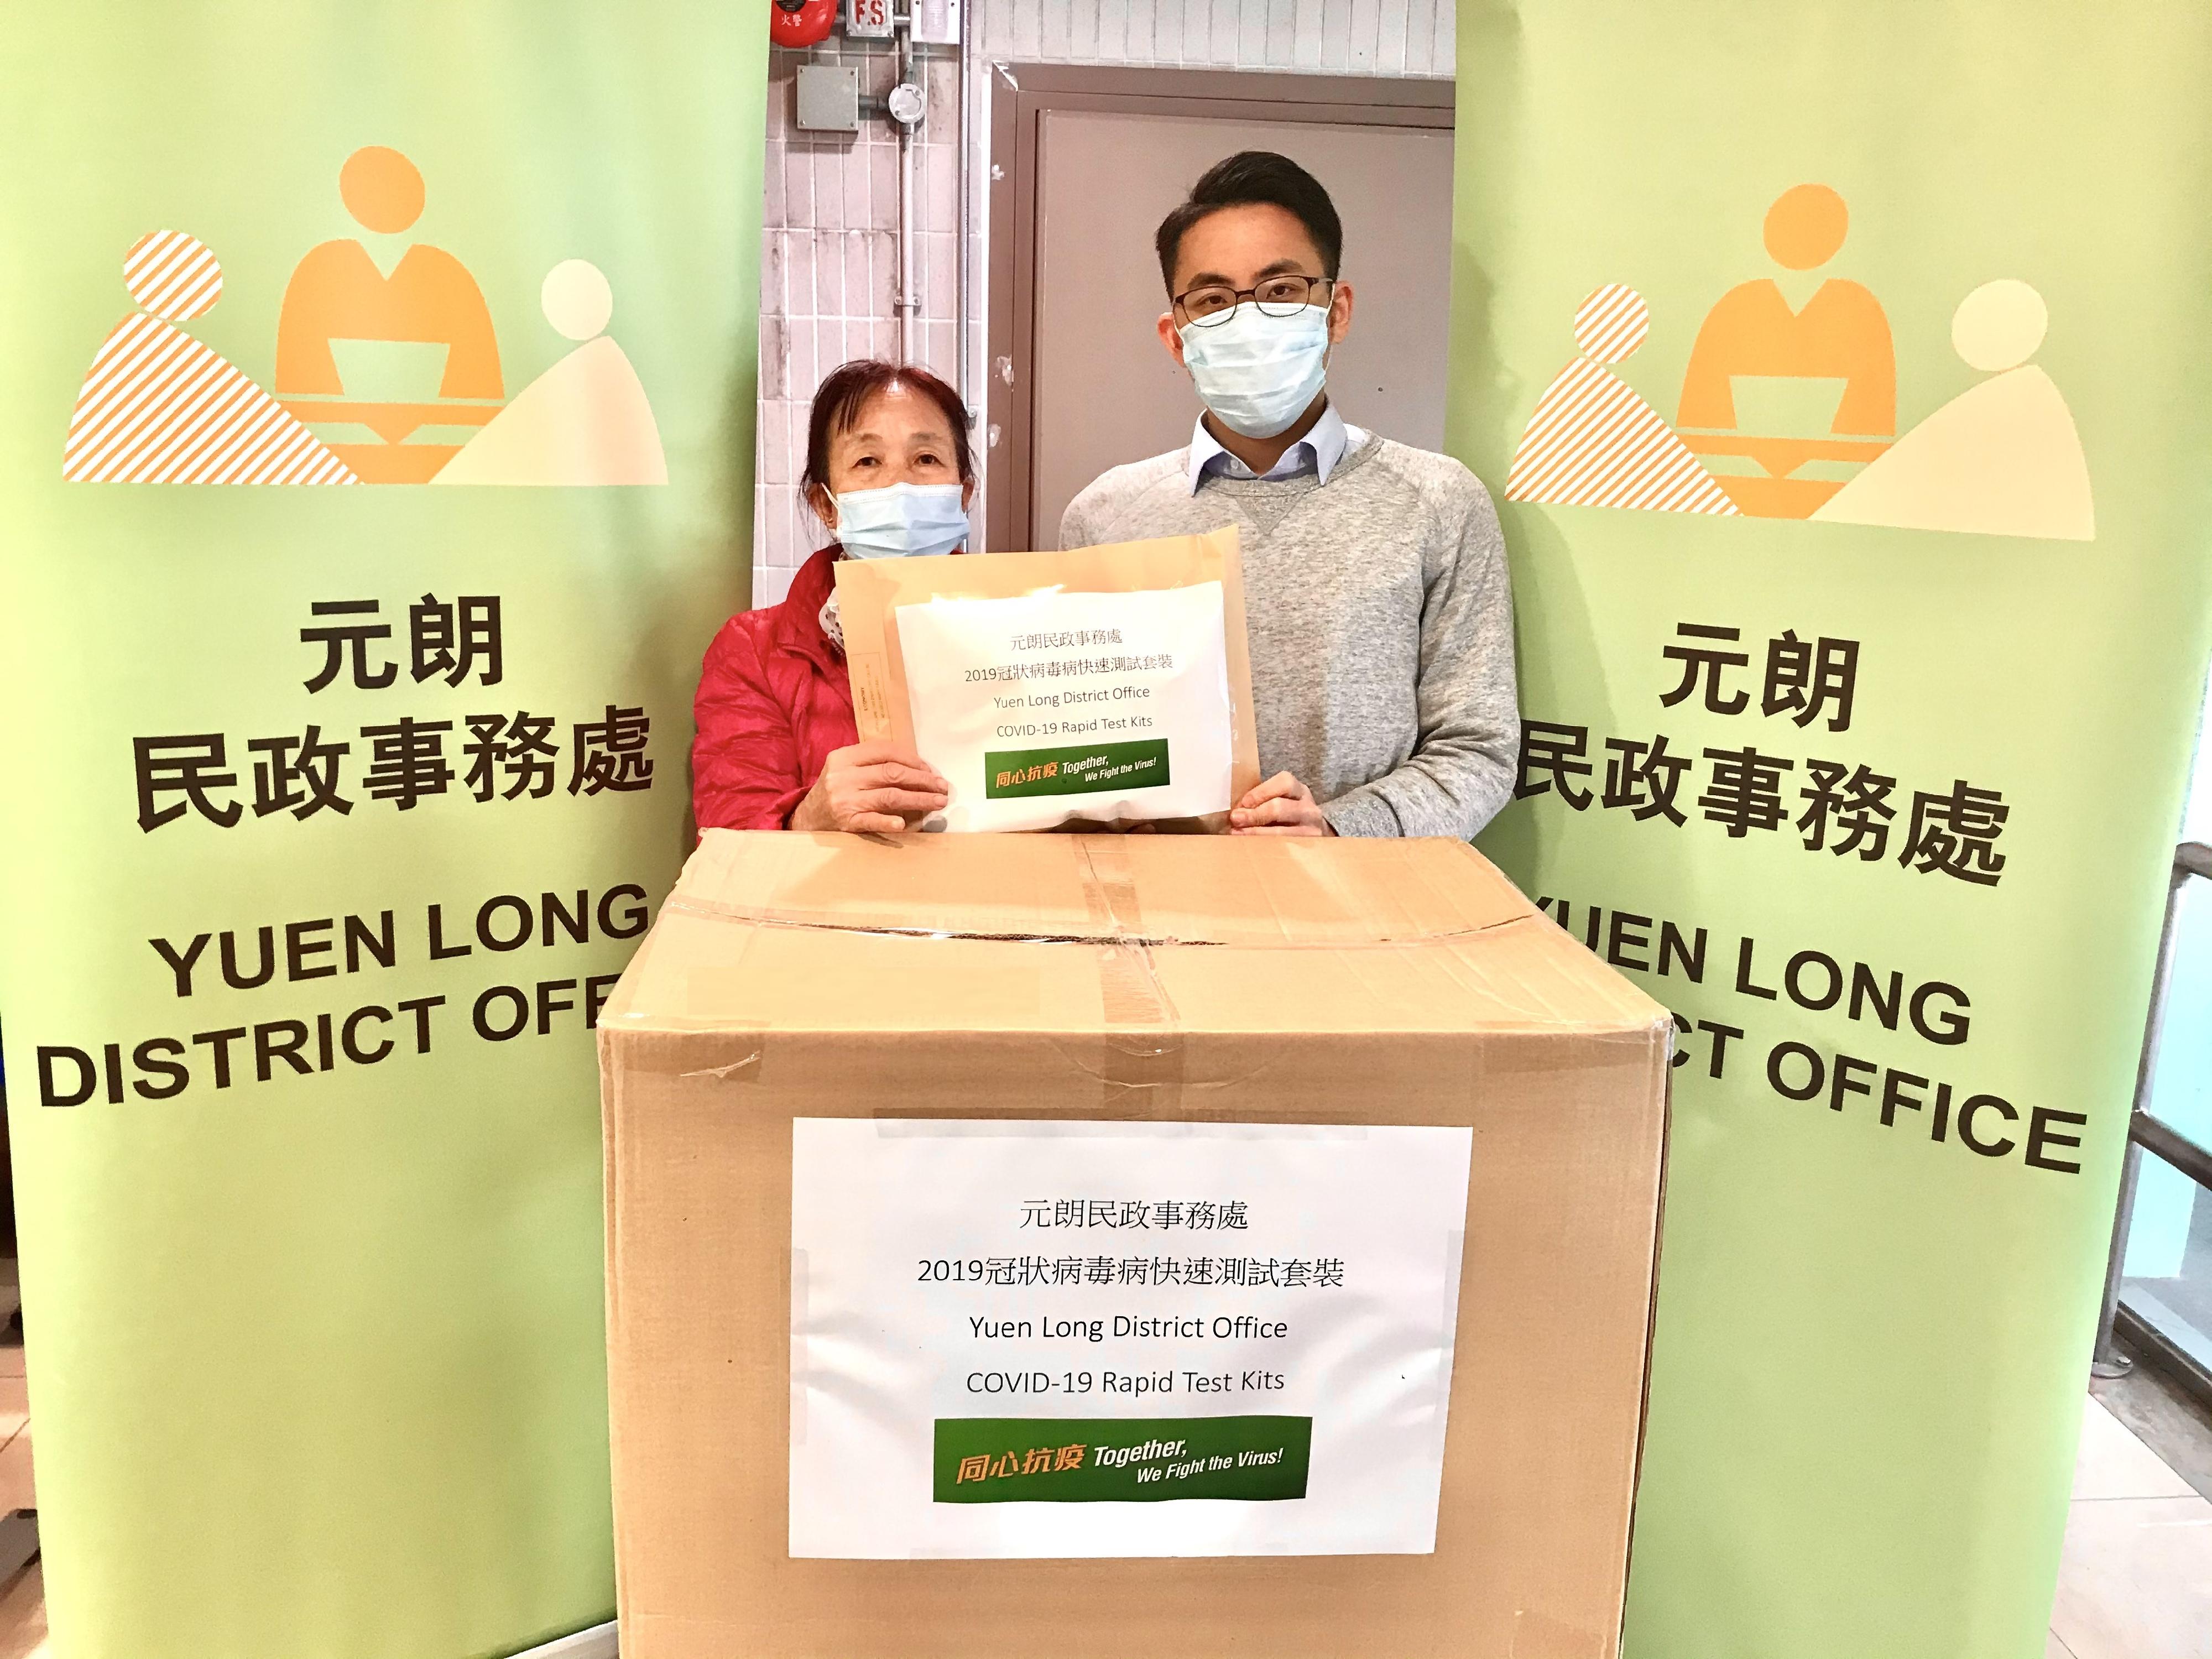 The Yuen Long District Office today (February 19) distributed COVID-19 rapid test kits to cleansing workers and property management staff working in Tin Yiu Estate for voluntary testing through the property management company of the Estate.